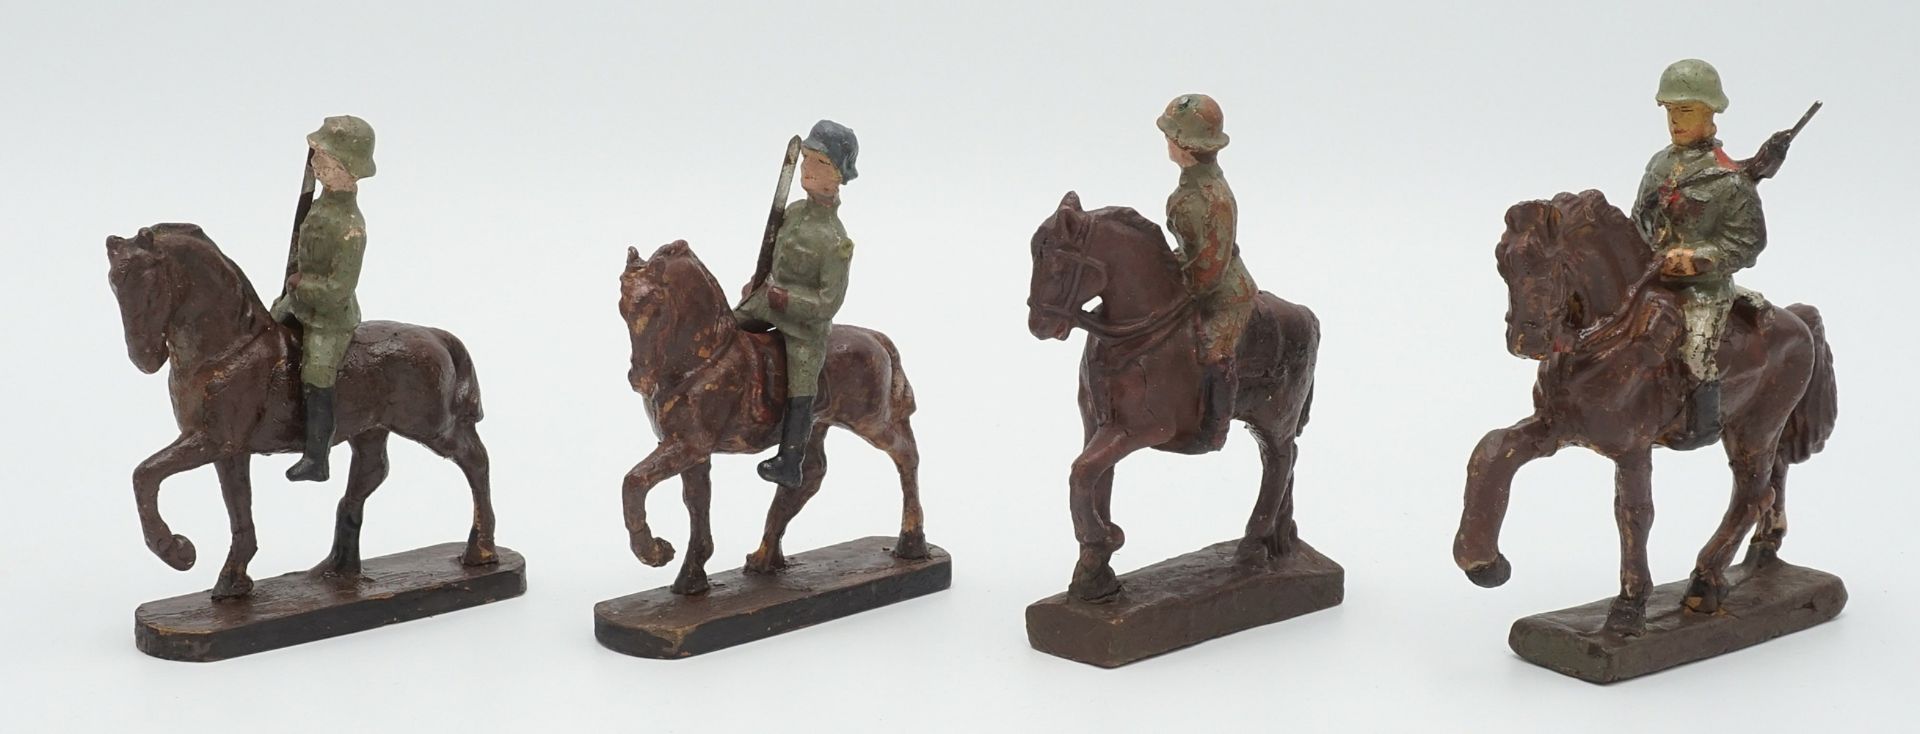 20 soldiers / mass figures - Image 2 of 5